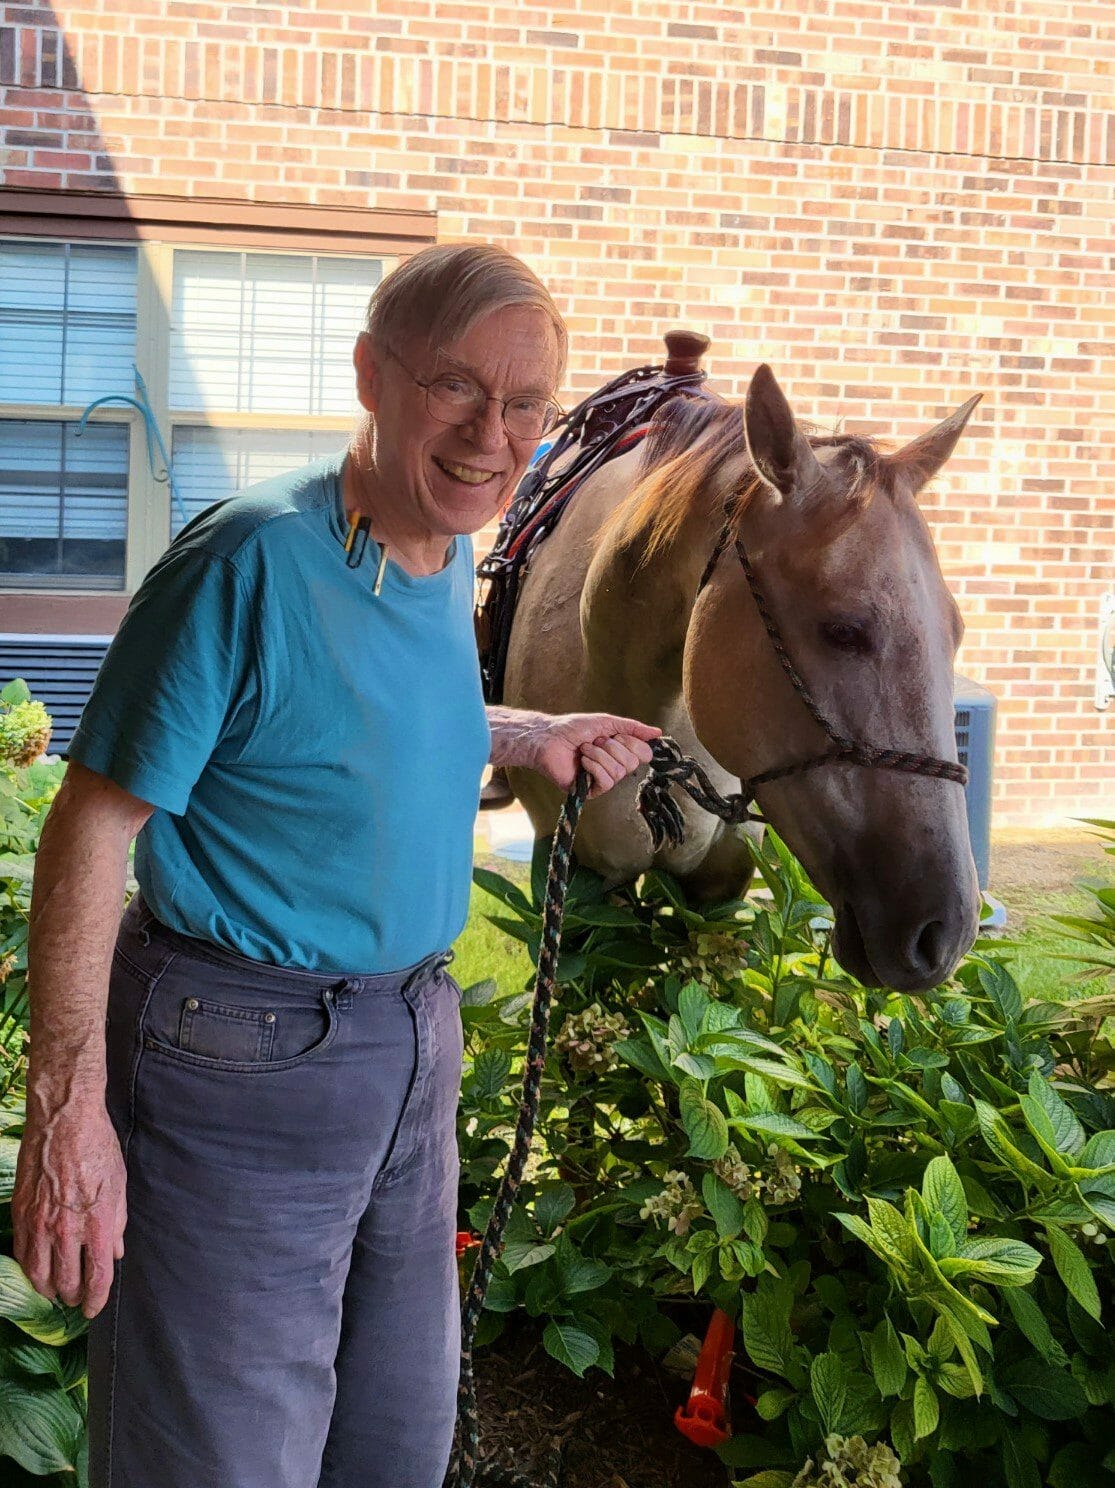 <span  class="uc_style_uc_tiles_grid_image_elementor_uc_items_attribute_title" style="color:#000000;">Resident with a horse</span>